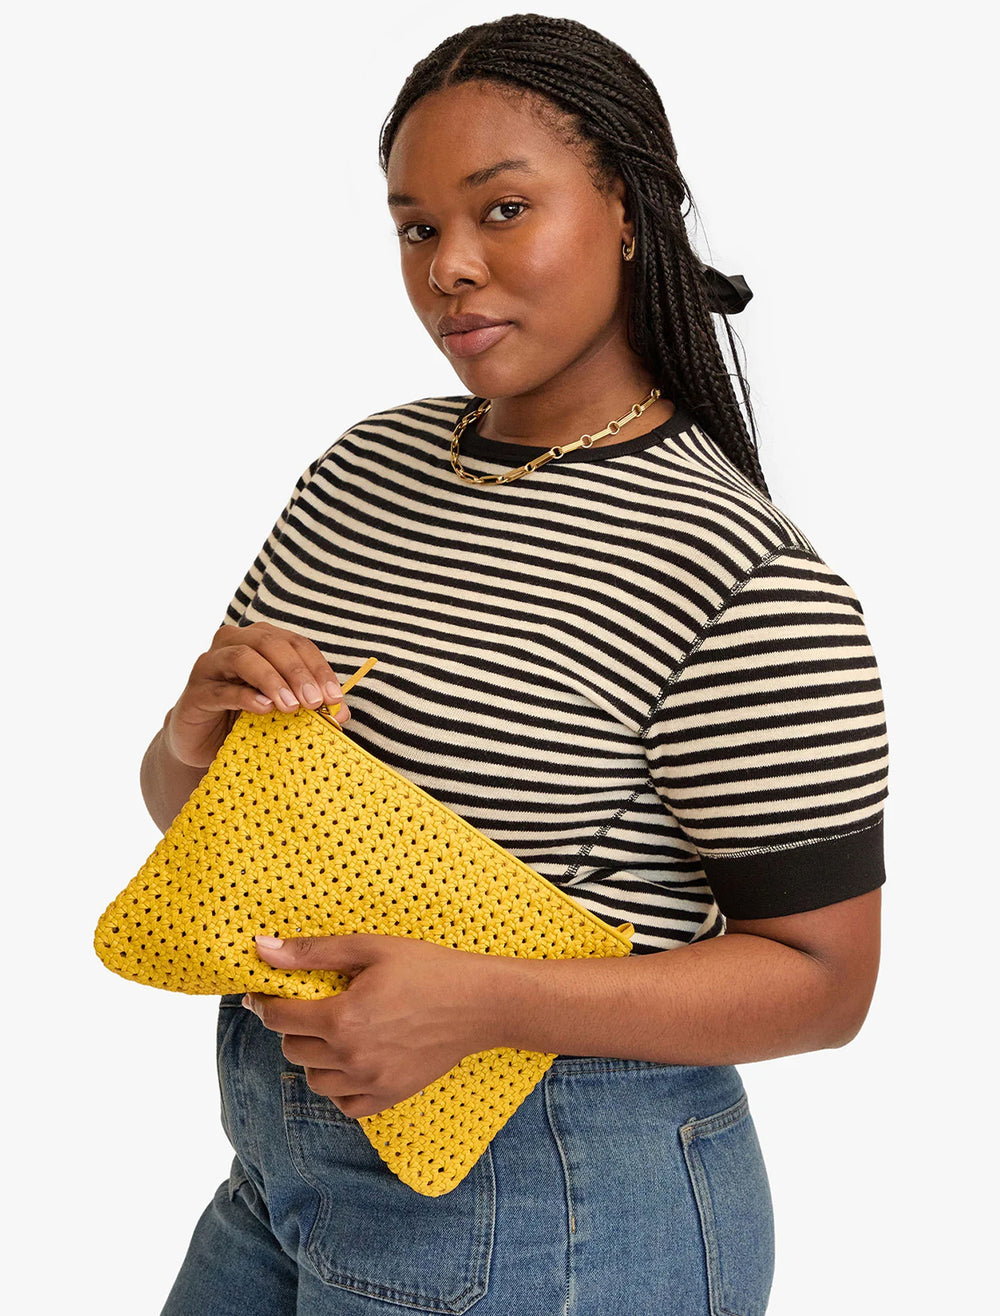 Model carrying Clare V.'s flat clutch with tabs in dandelion rattan.